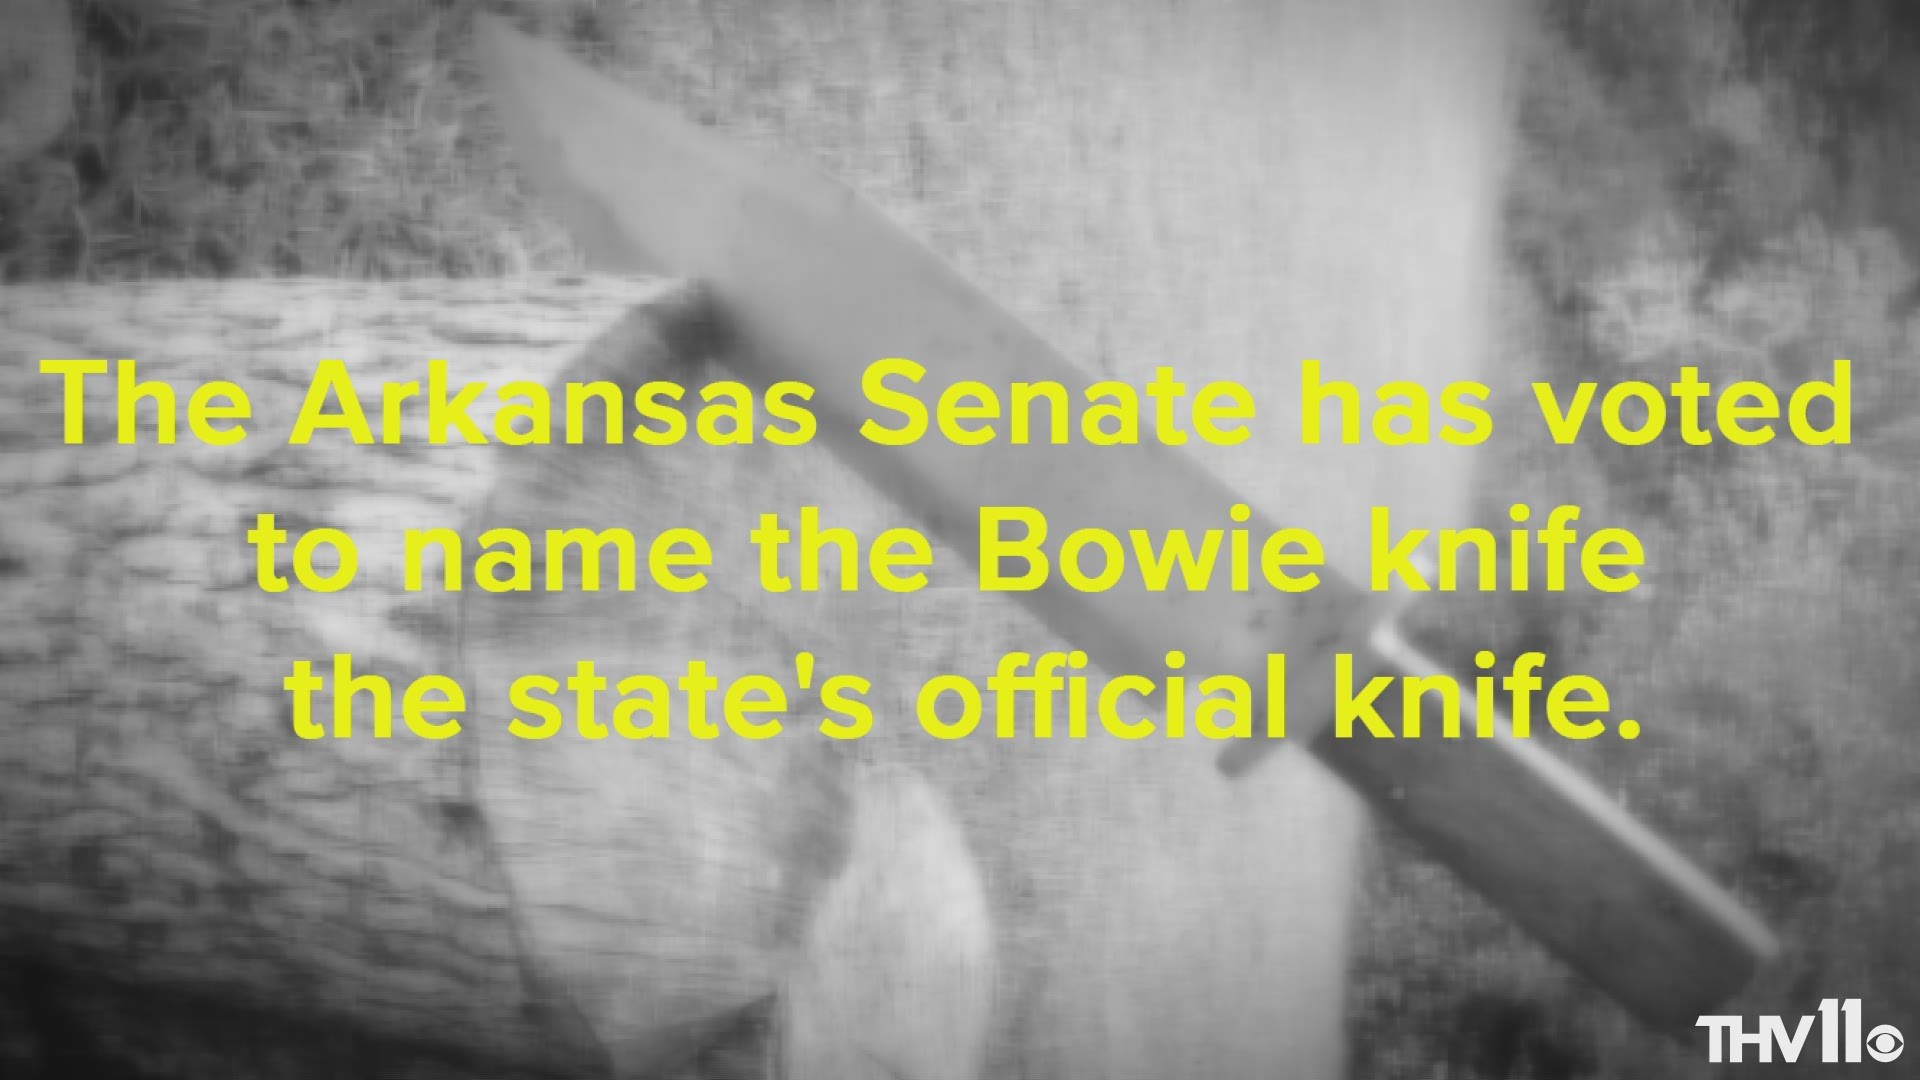 The Arkansas Senate has voted to name the Bowie knife the state's official knife.